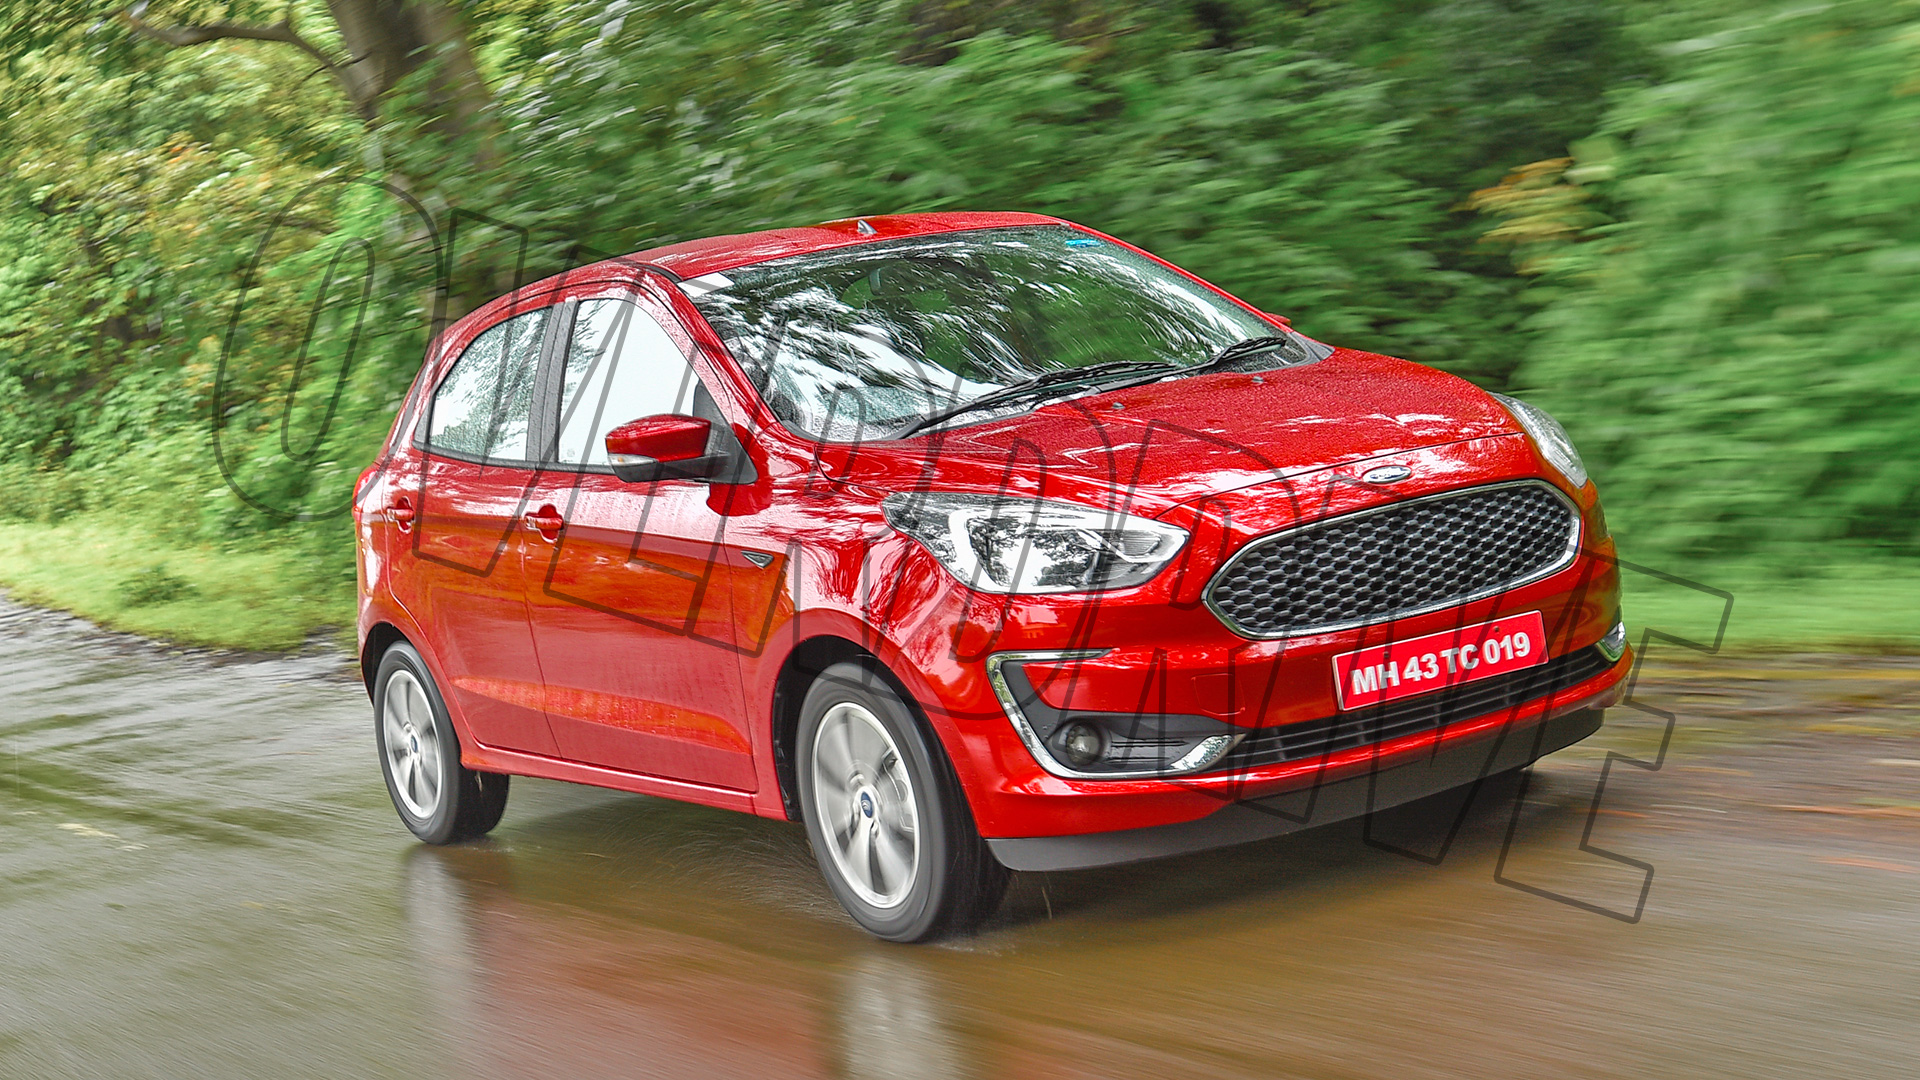 Ford Figo 2021 - Price in India, Mileage, Reviews, Colours, Specification,  Images - Overdrive